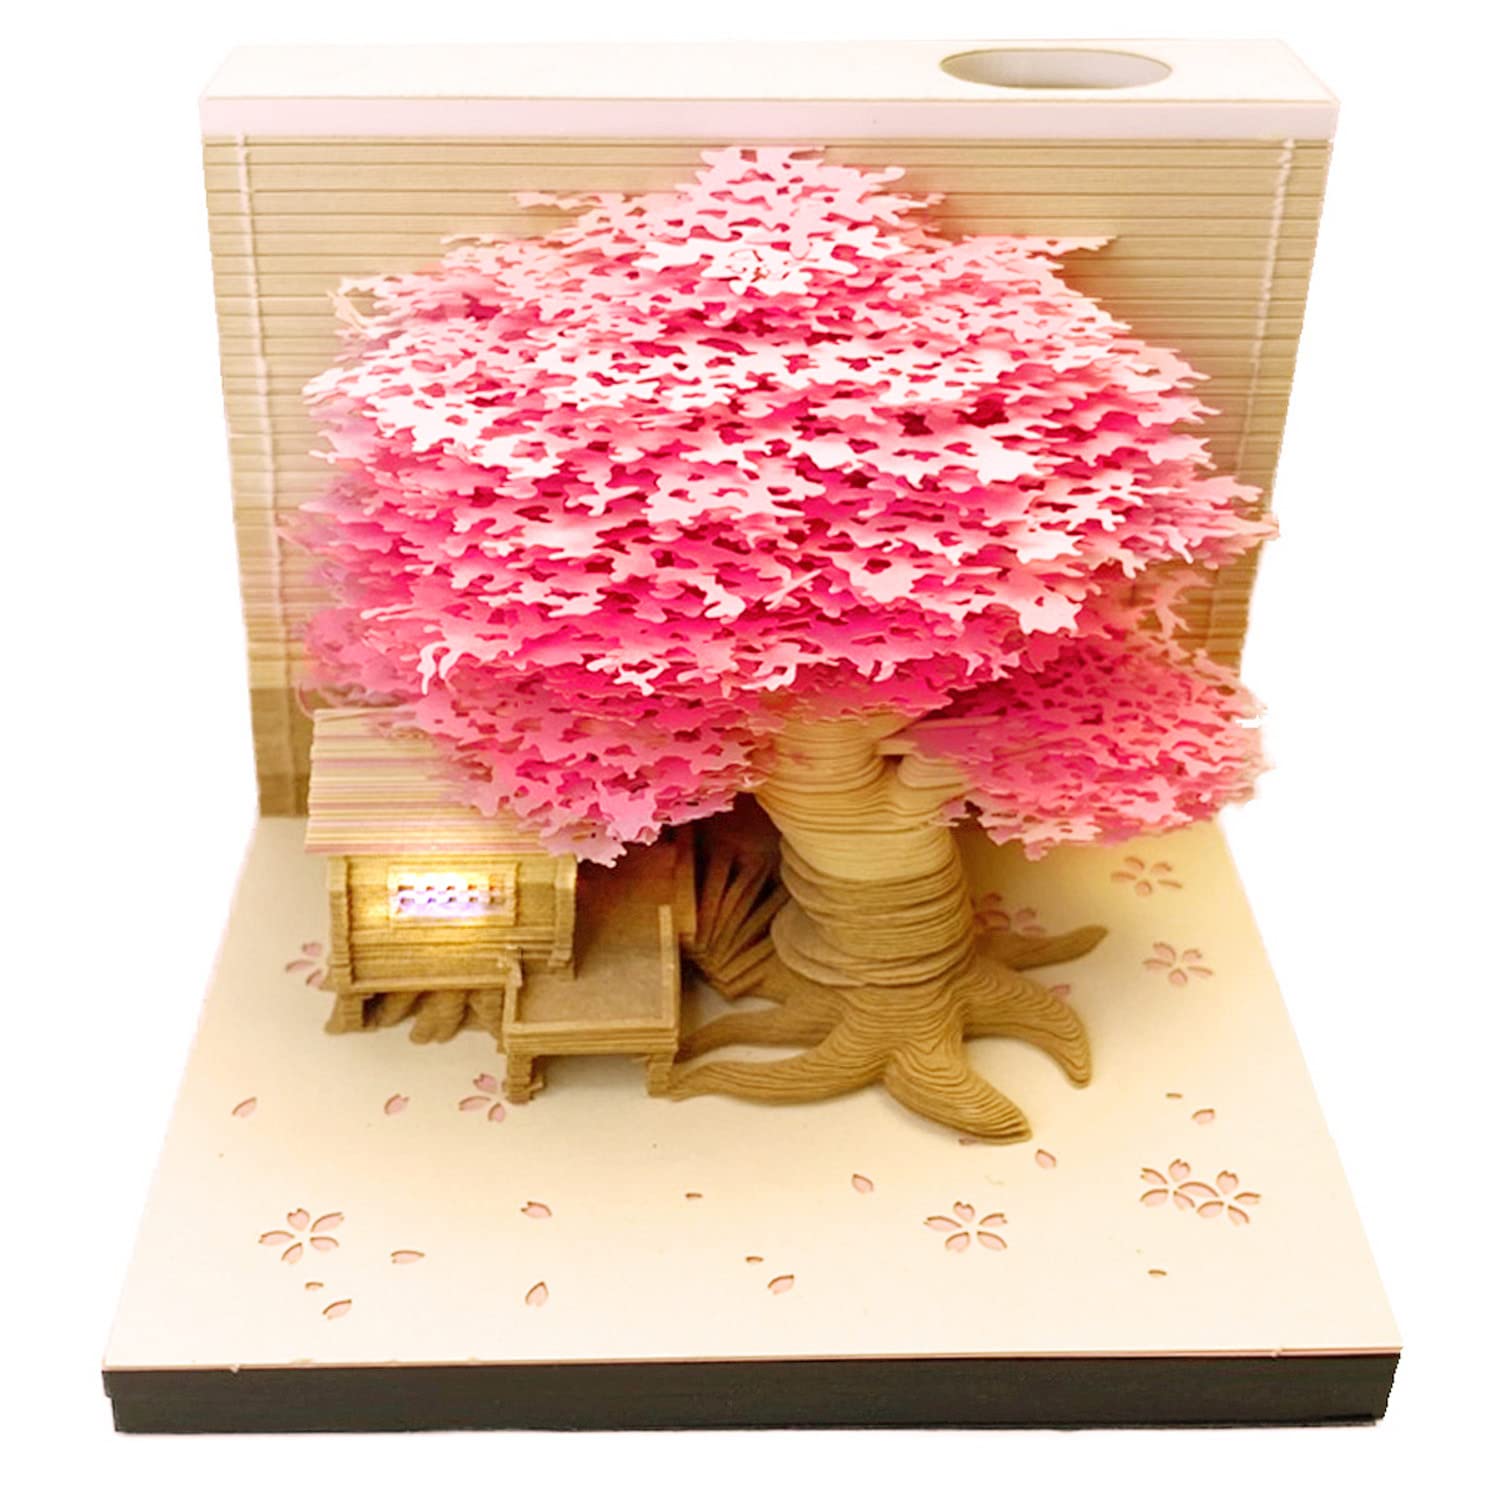  Cherry Blossom Tree House - 3D Memo Pad  with Light-BOOK NOOK WORLD